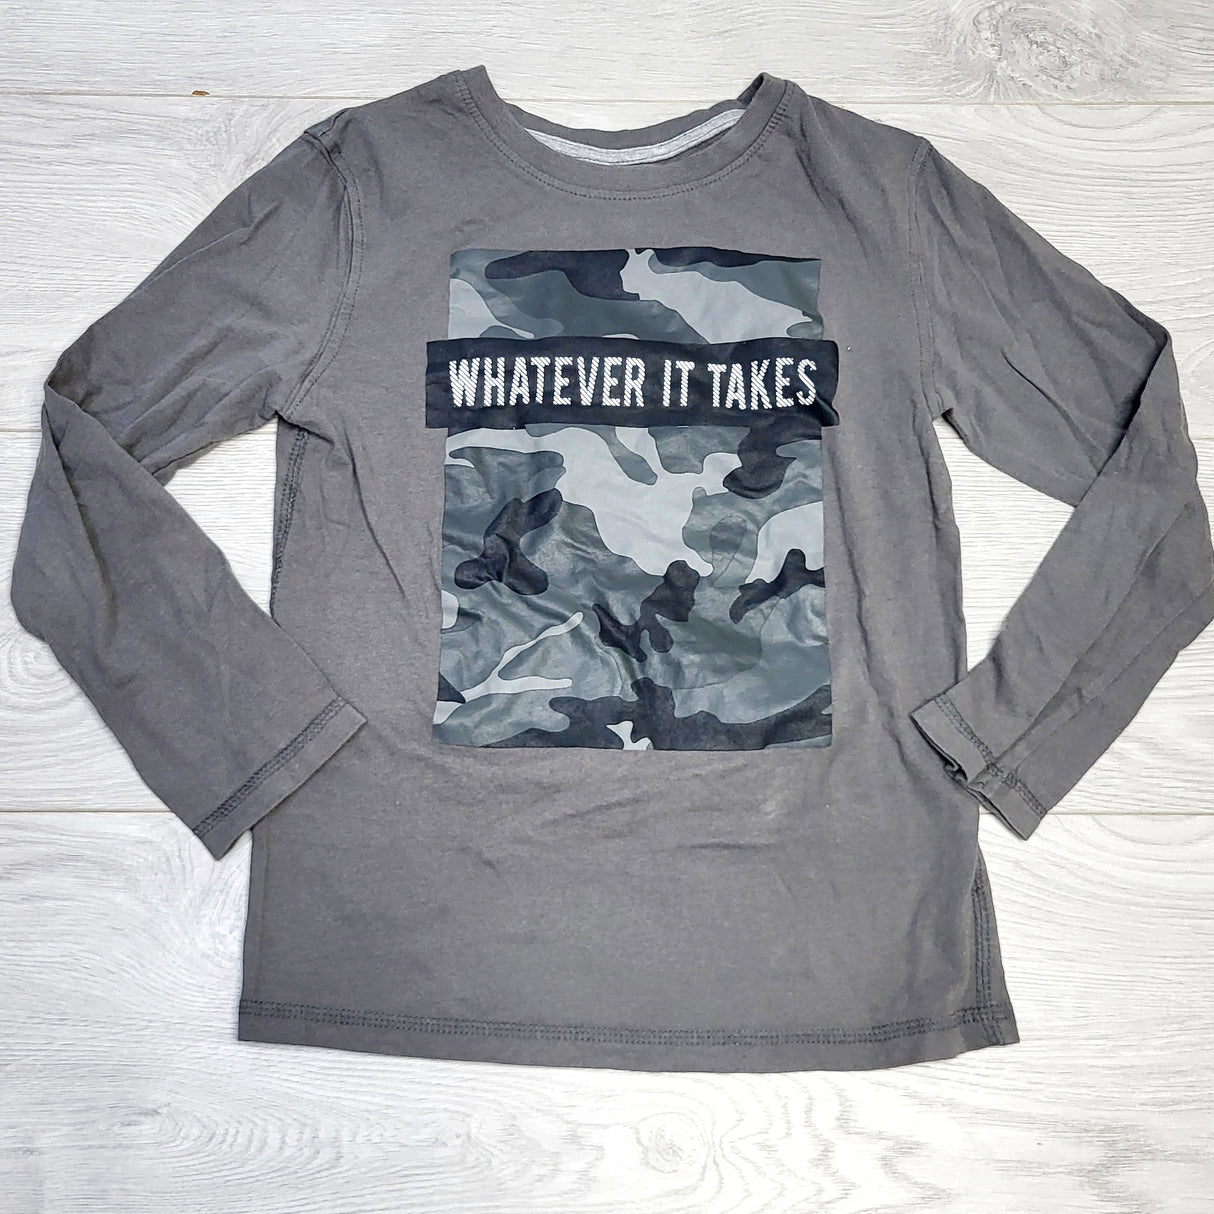 ANHA2 - George grey "Whatever it Takes" long sleeved top, size 7/8